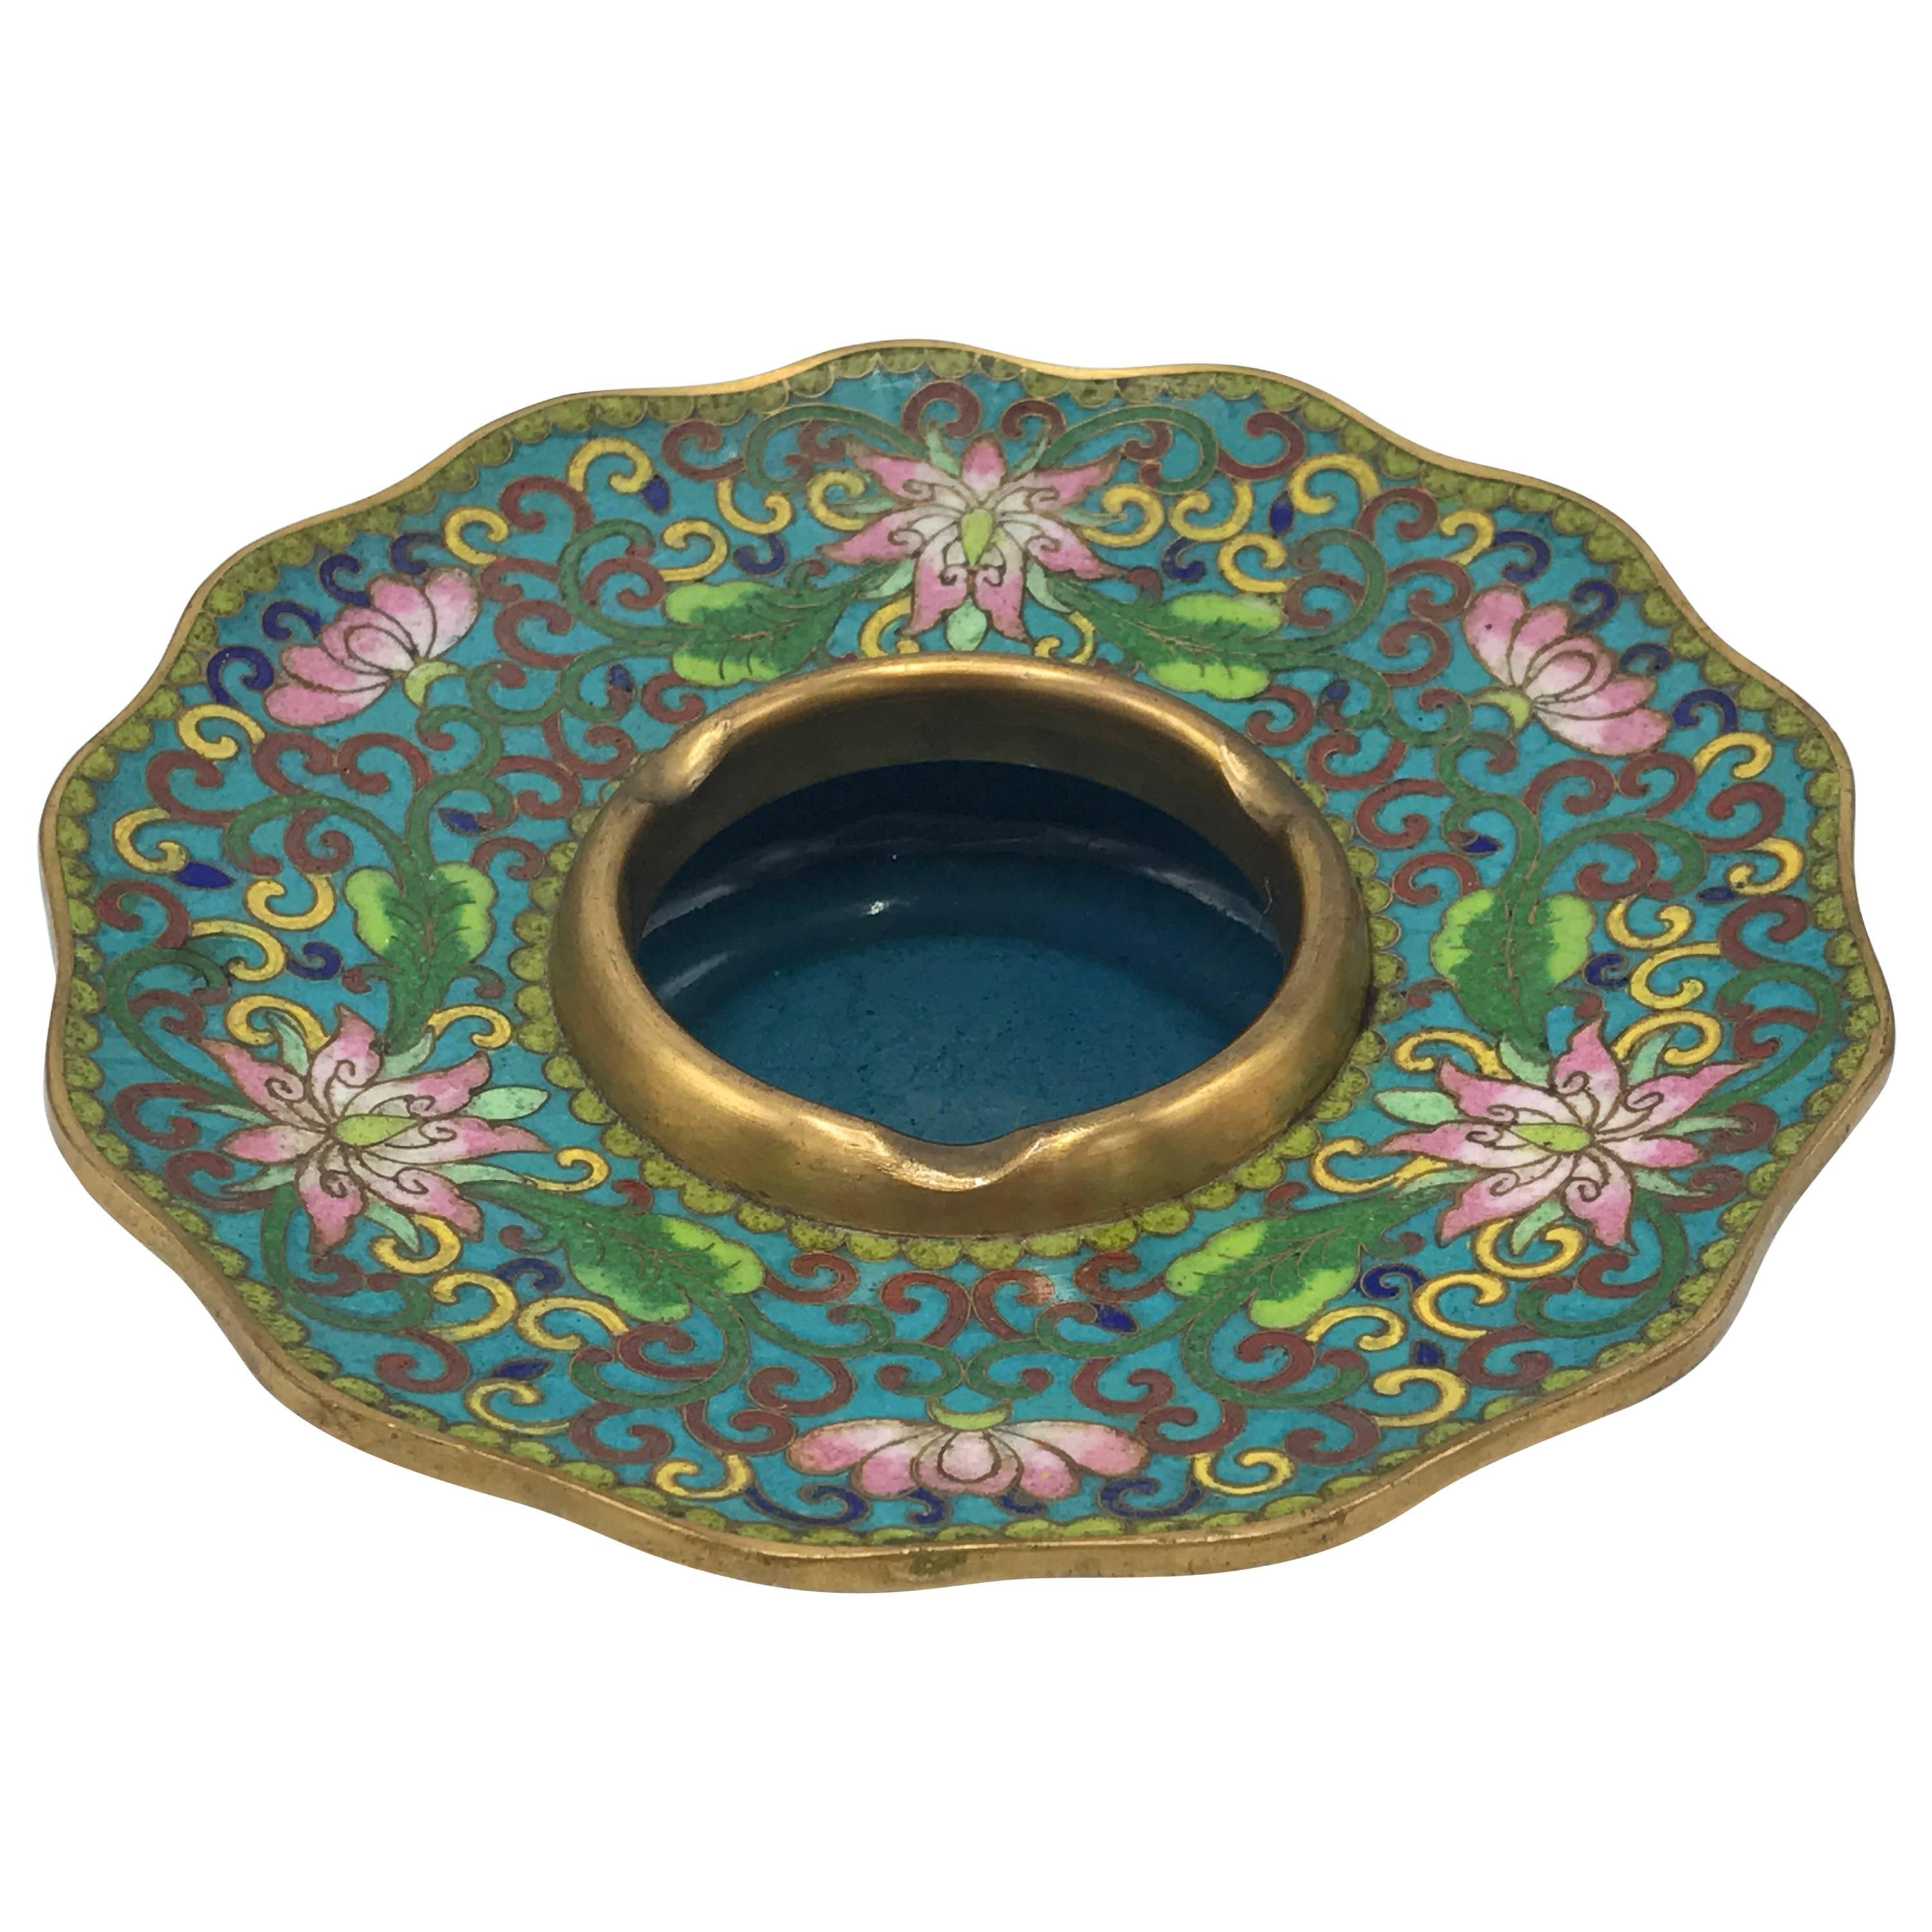 1950s Blue and Green Cloisonné Ashtray